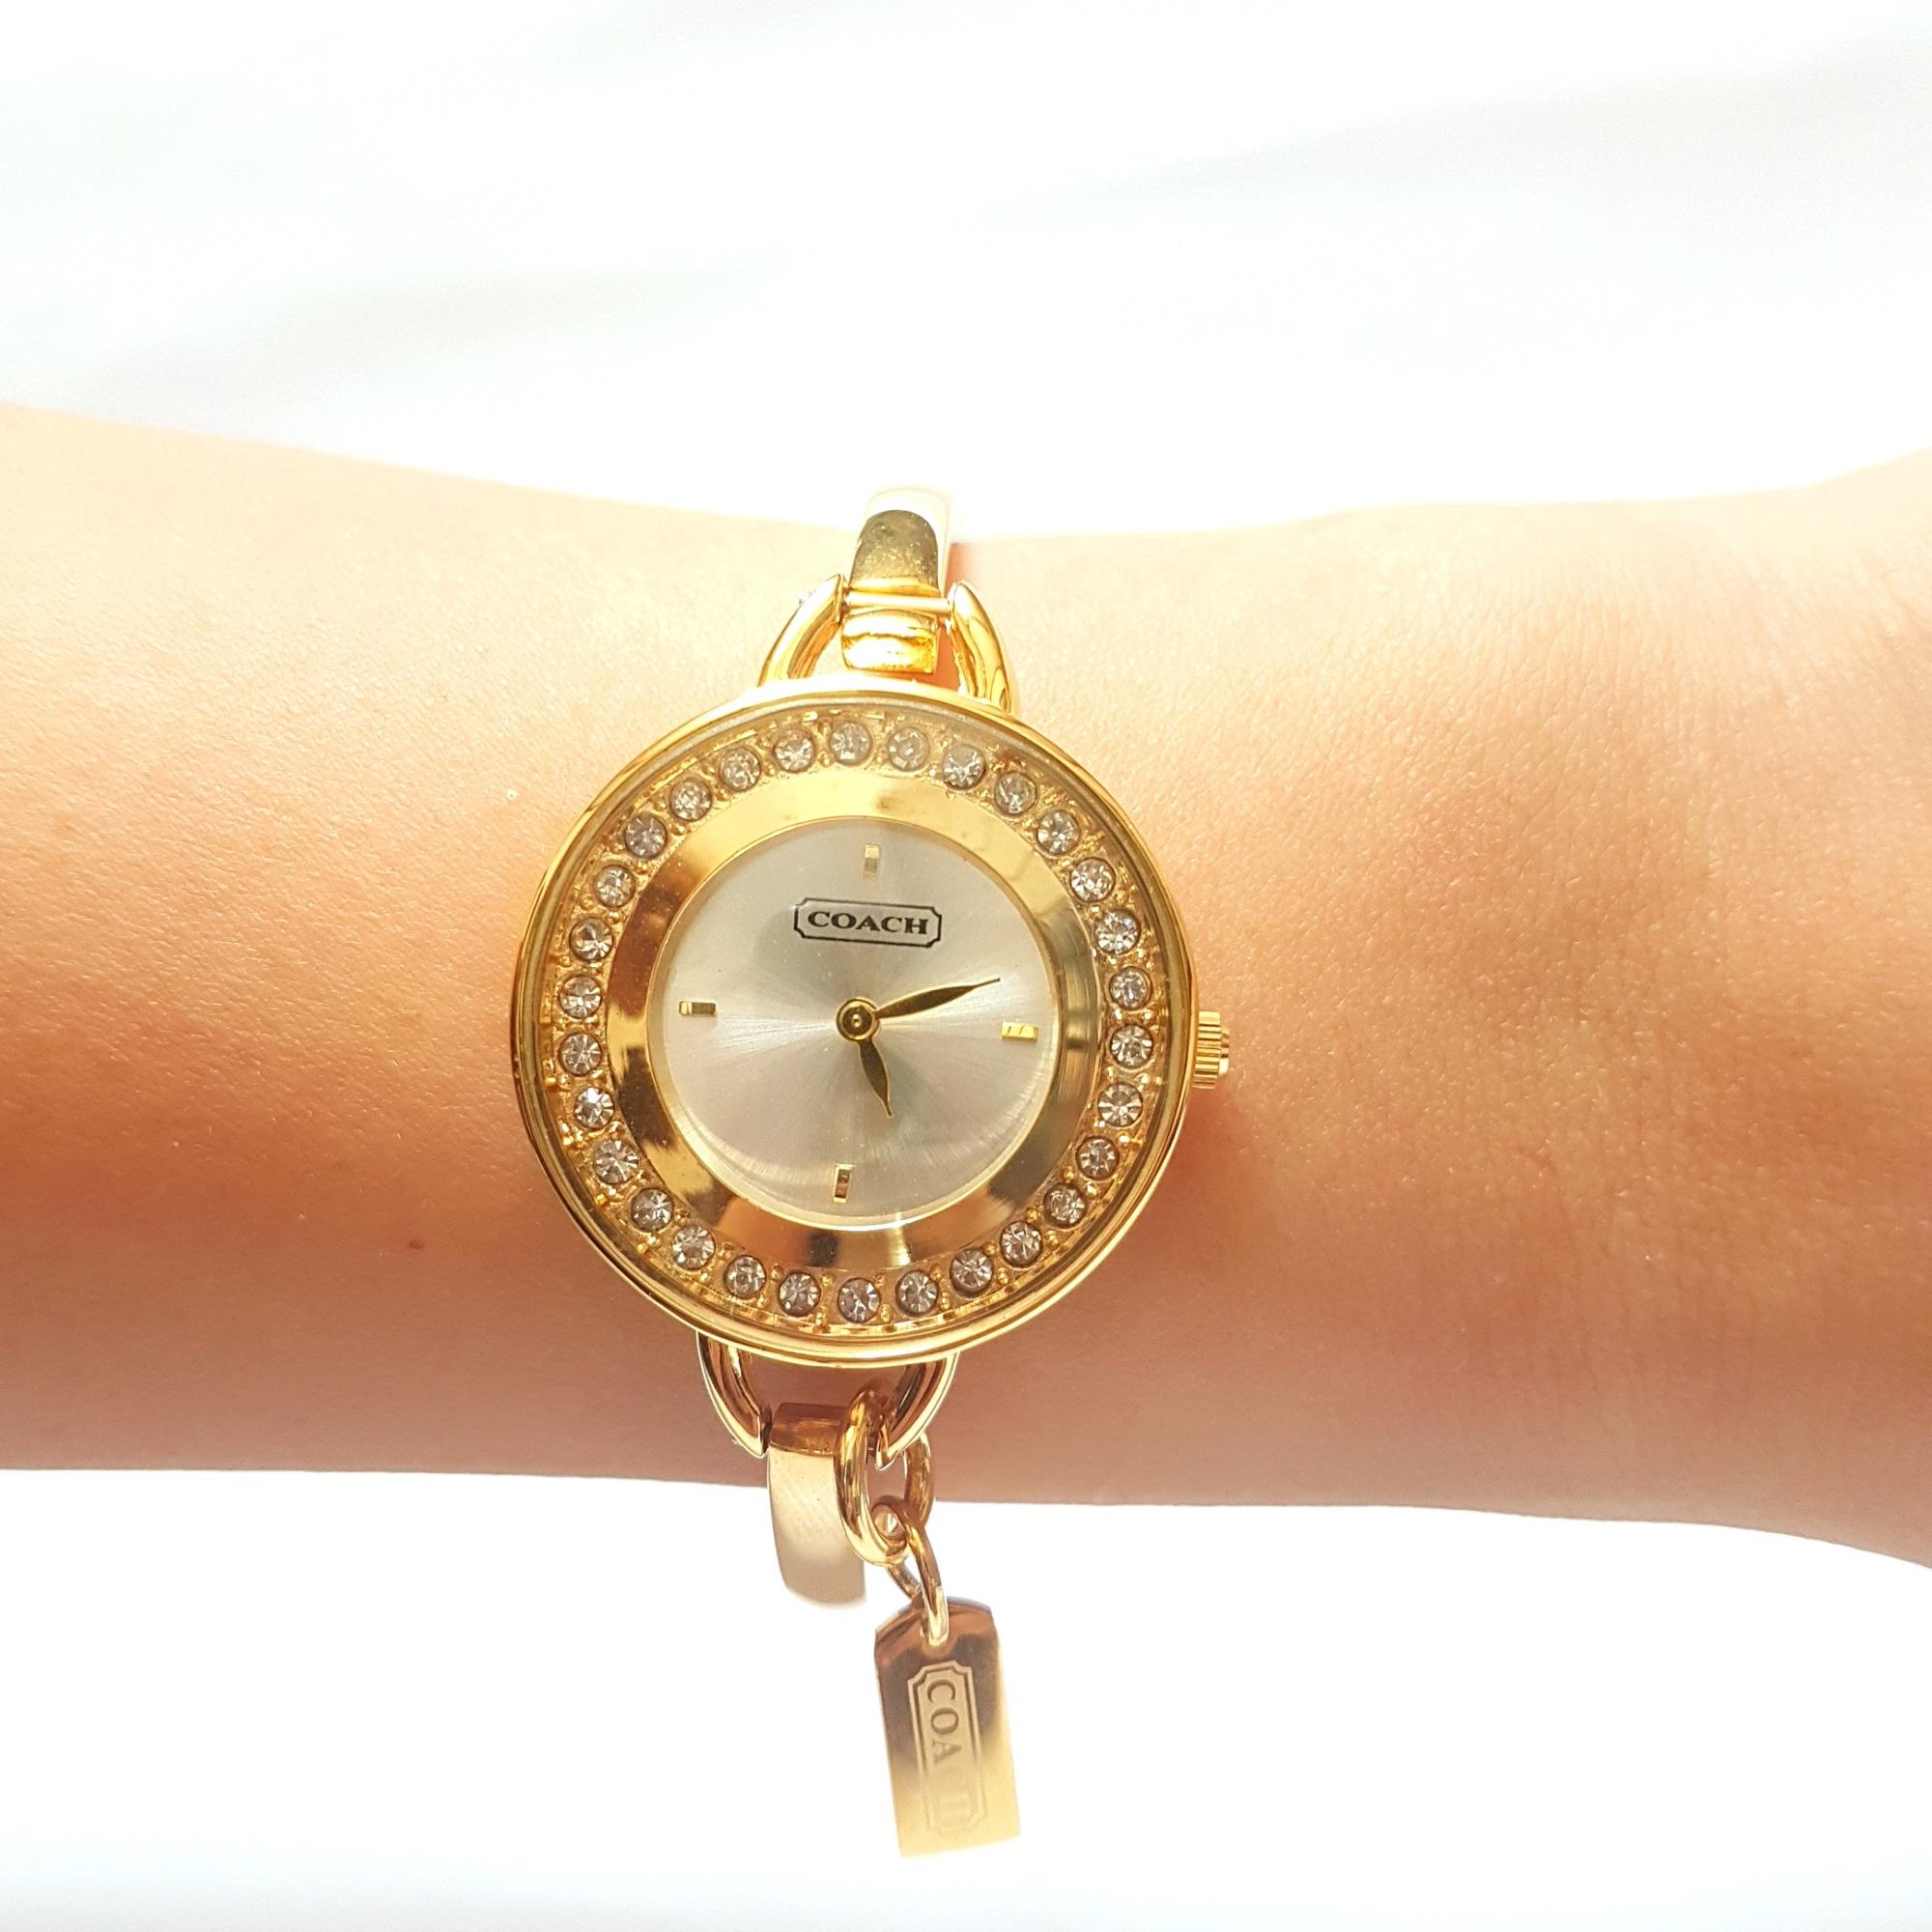 Sale!!Coach Watch Bangle review and price